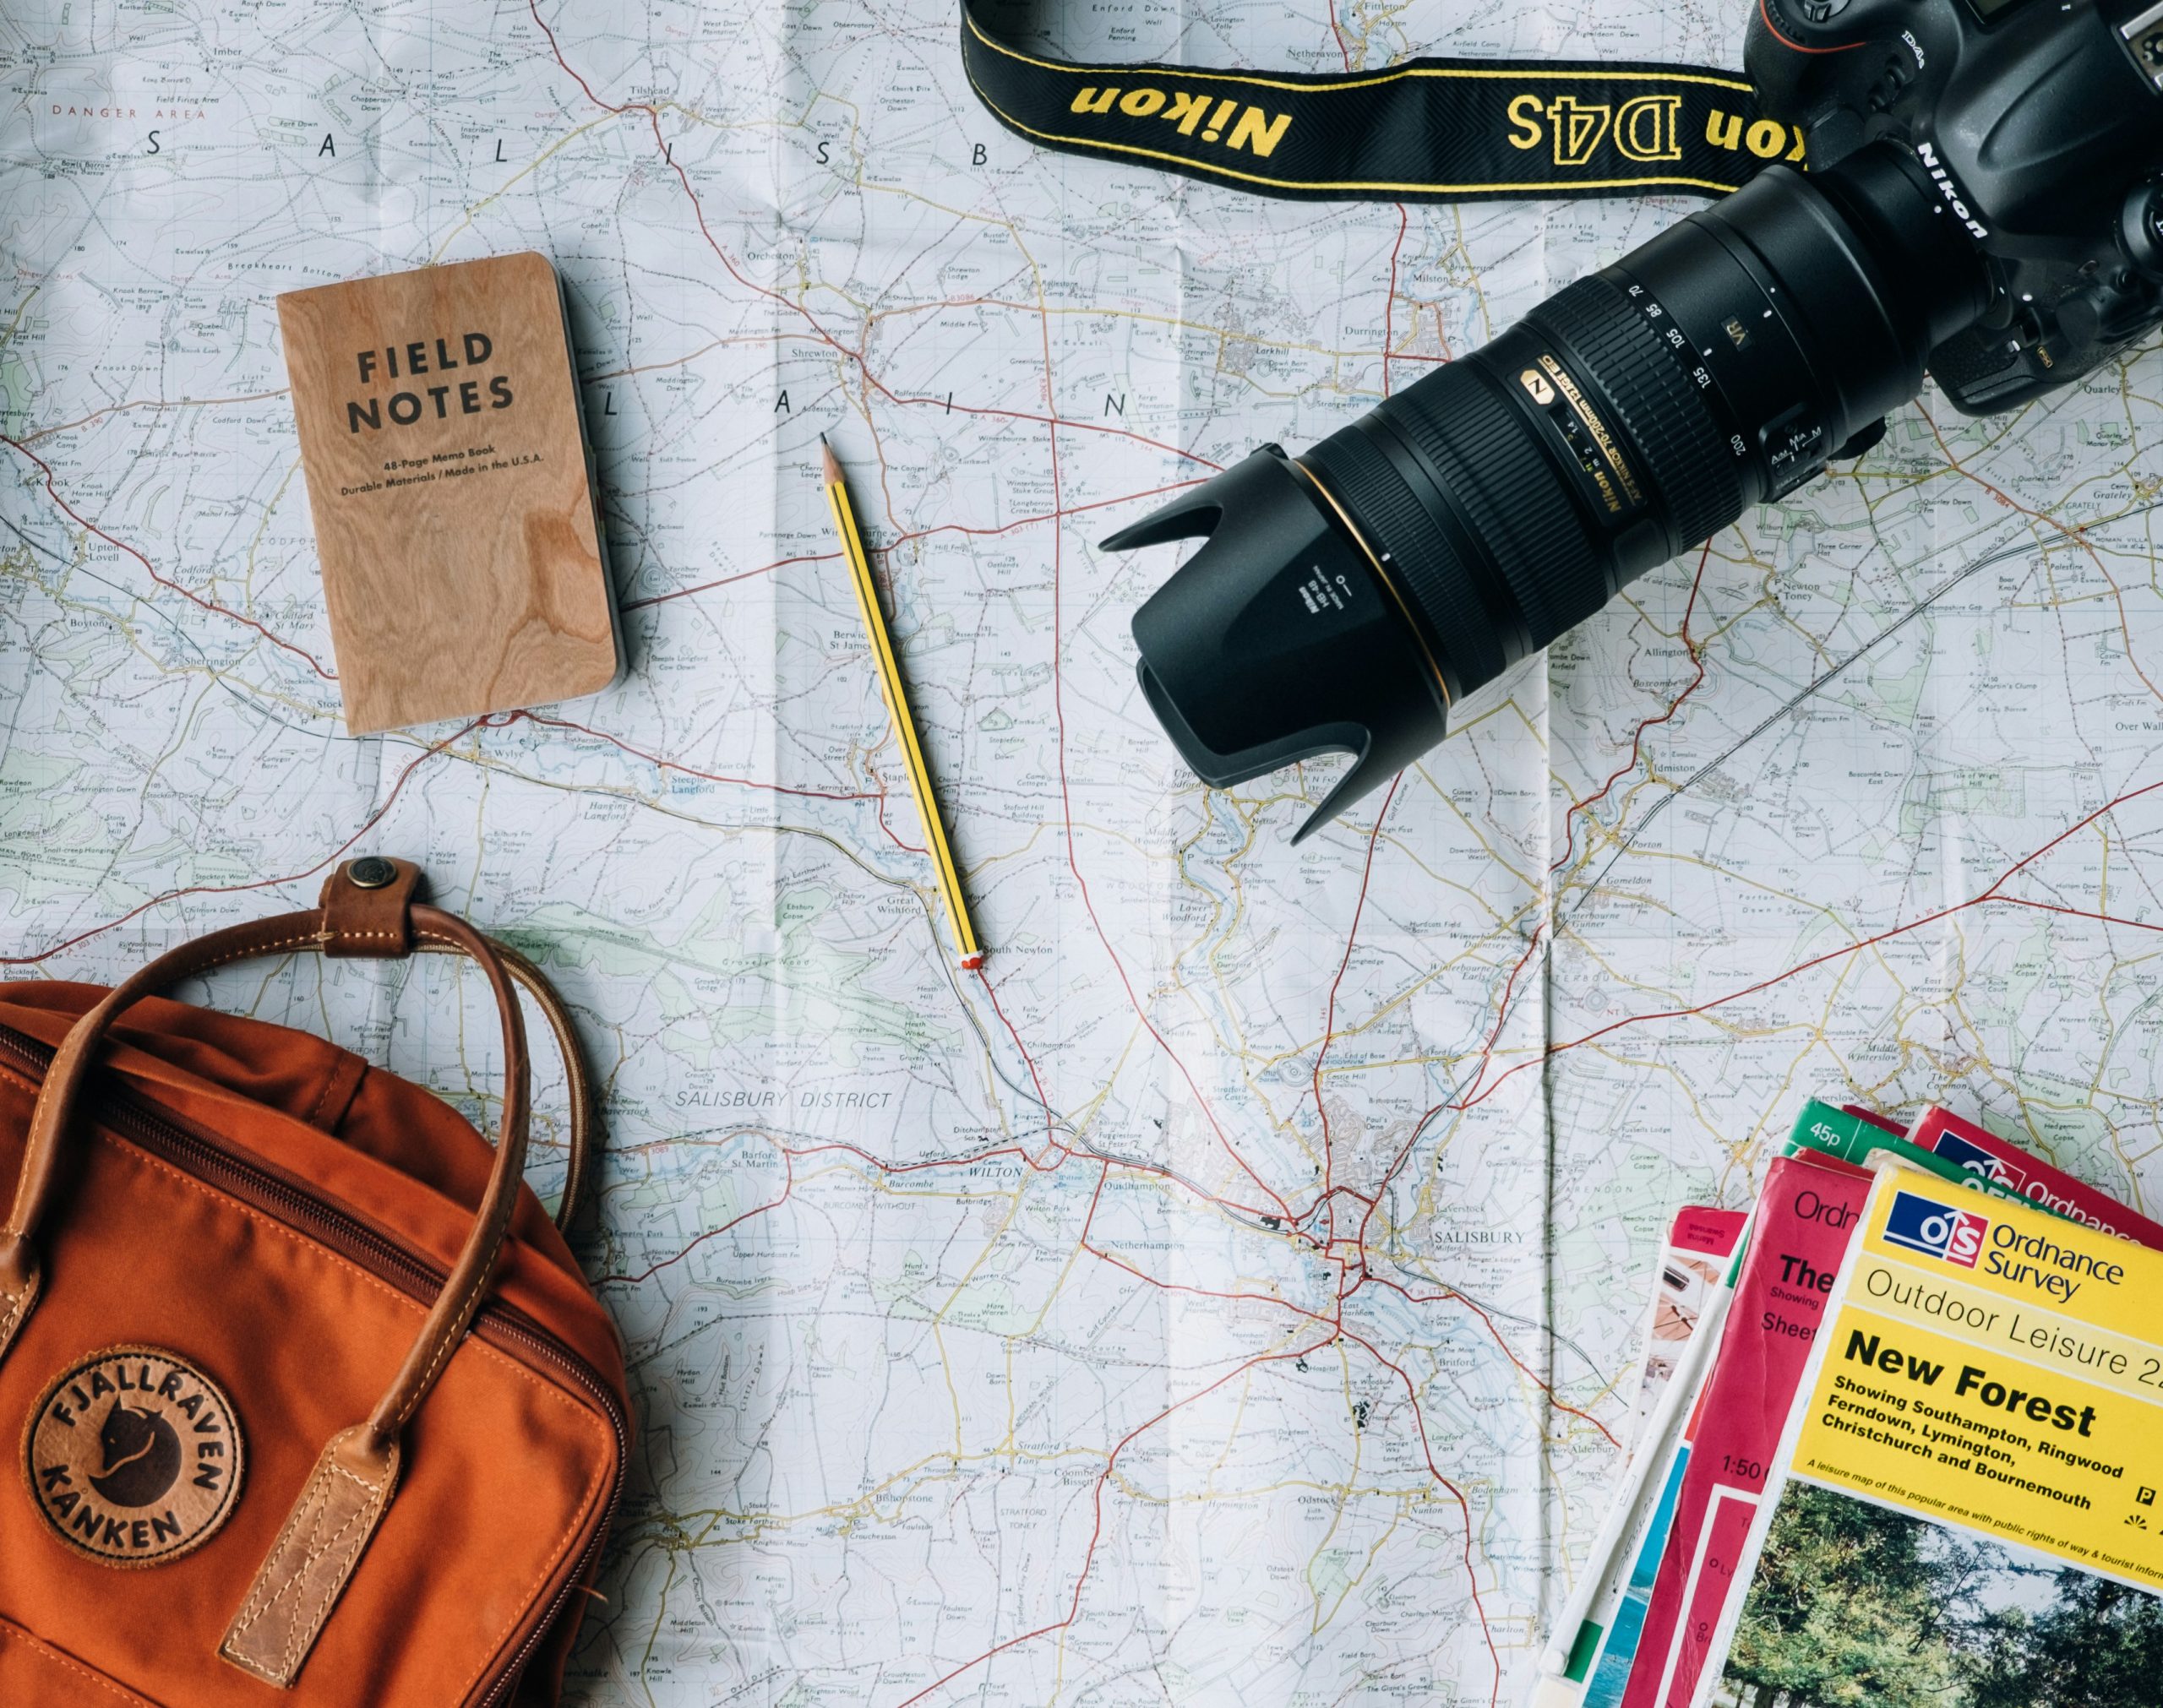 discover the best travel tips, guides, and advice on our engaging travel blog. plan your next adventure with our inspiring travel stories and destination guides.